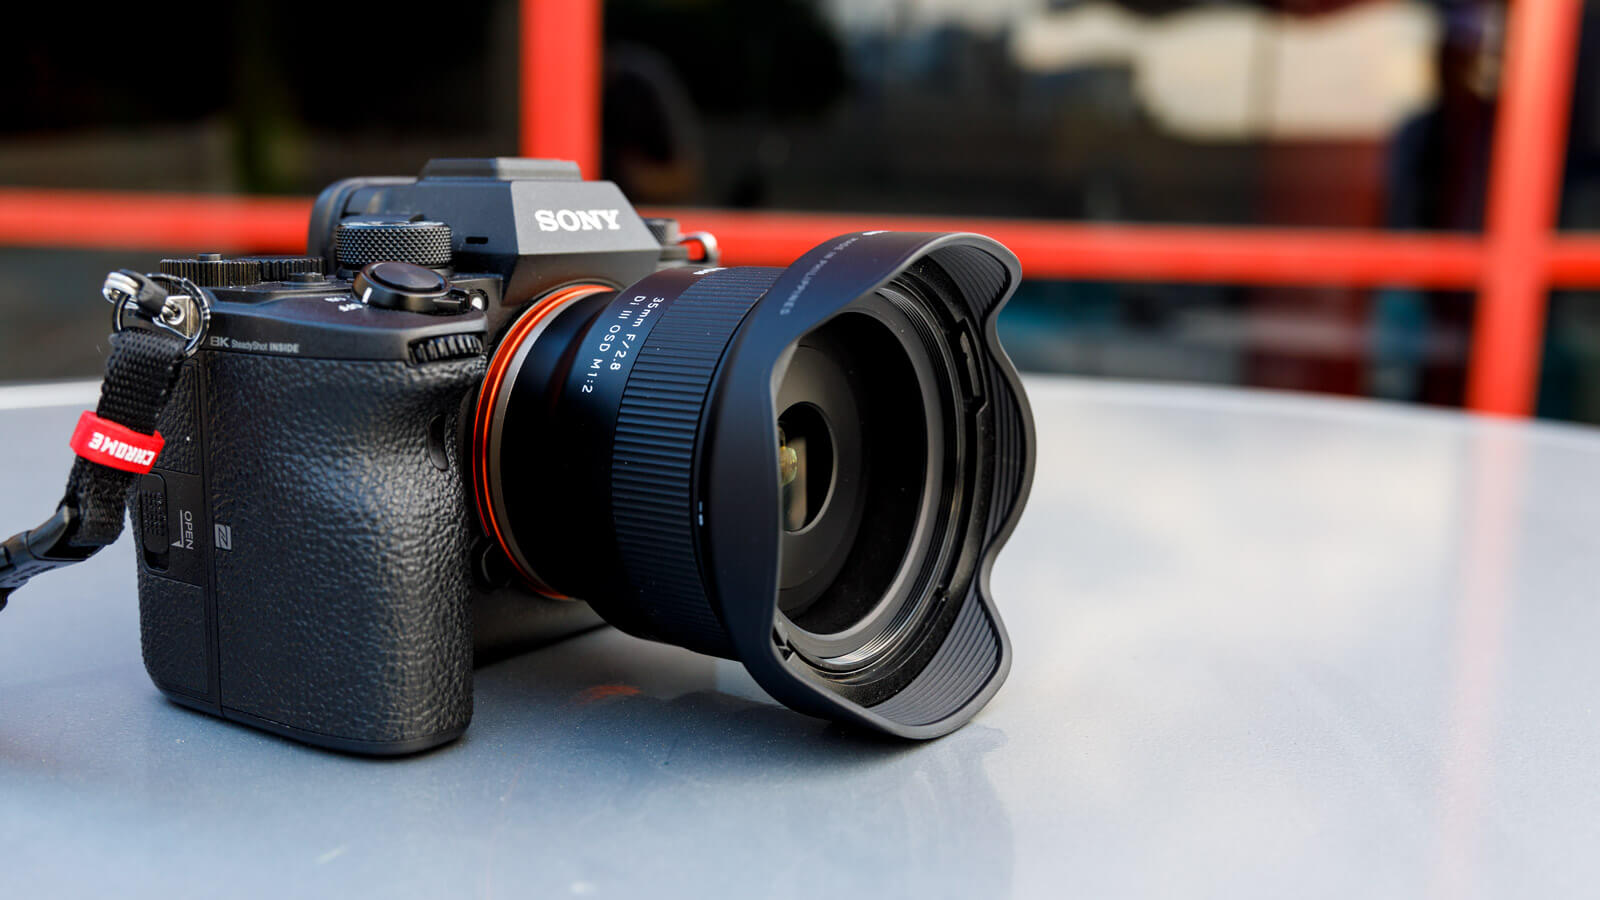 Tamron 35mm f/2.8 review: A sharp workhorse prime that will get